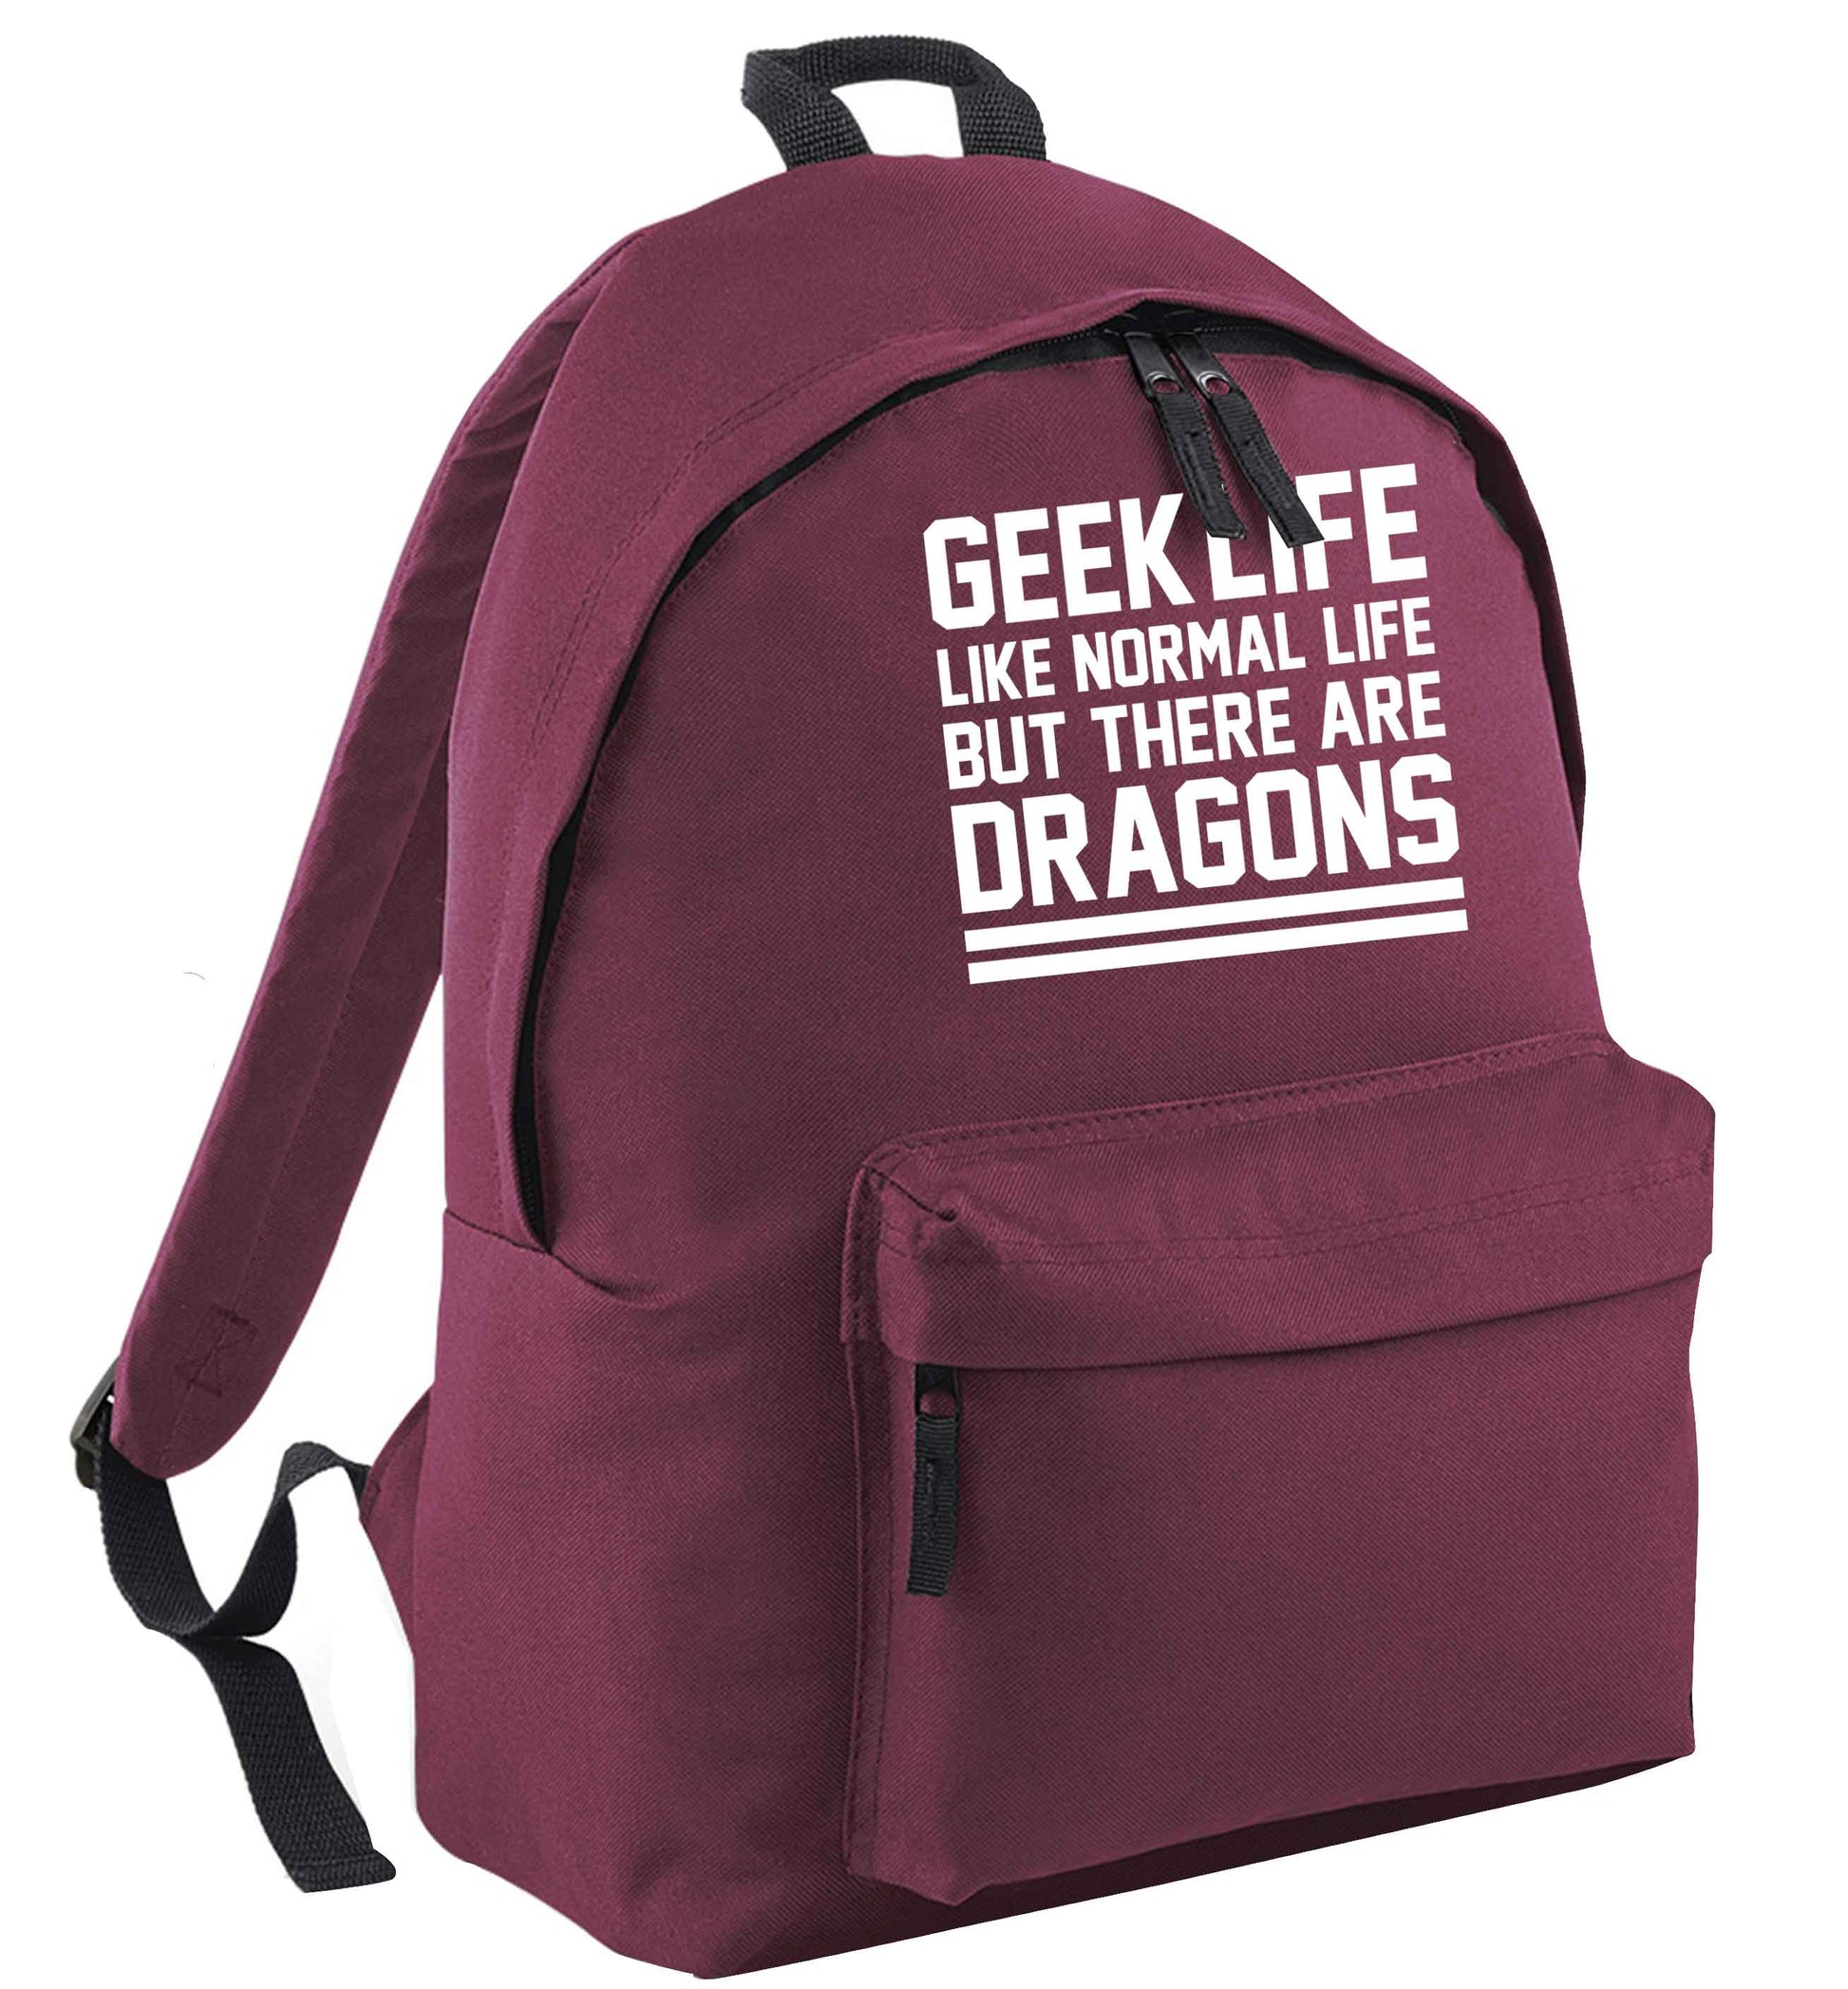 Geek life like normal life but there are dragons maroon adults backpack